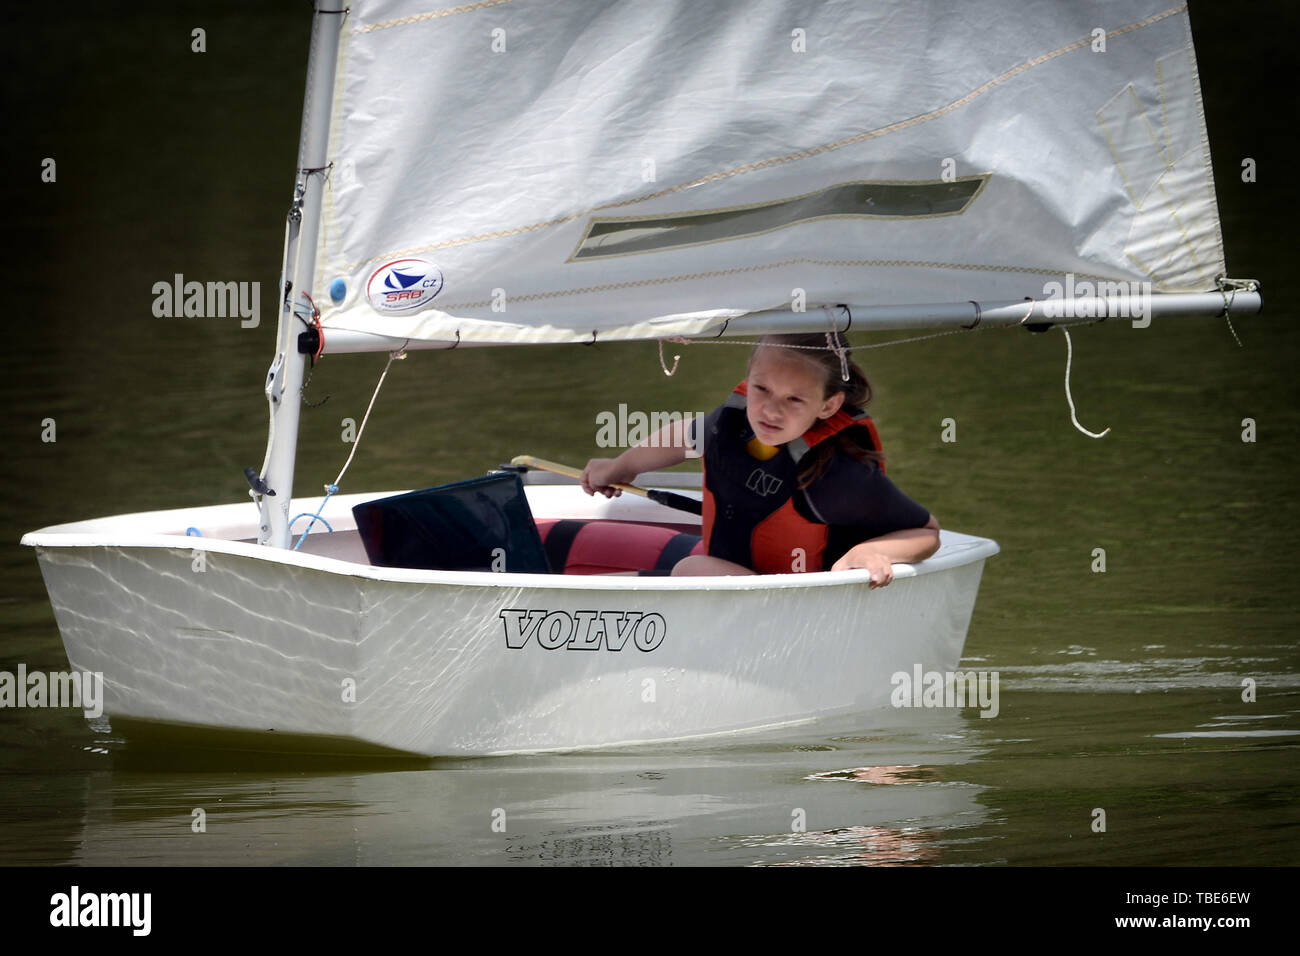 Stare Splavy, Czech Republic. 1st June, 2019. Young competitors starting the race for the Optimist sailing at Lake Macha in Stare Splavy in the Czech Republic. The Optimist single-handed sailing dinghy intended for use by children up to the age of 15. Credit: Slavek Ruta/ZUMA Wire/Alamy Live News Stock Photo